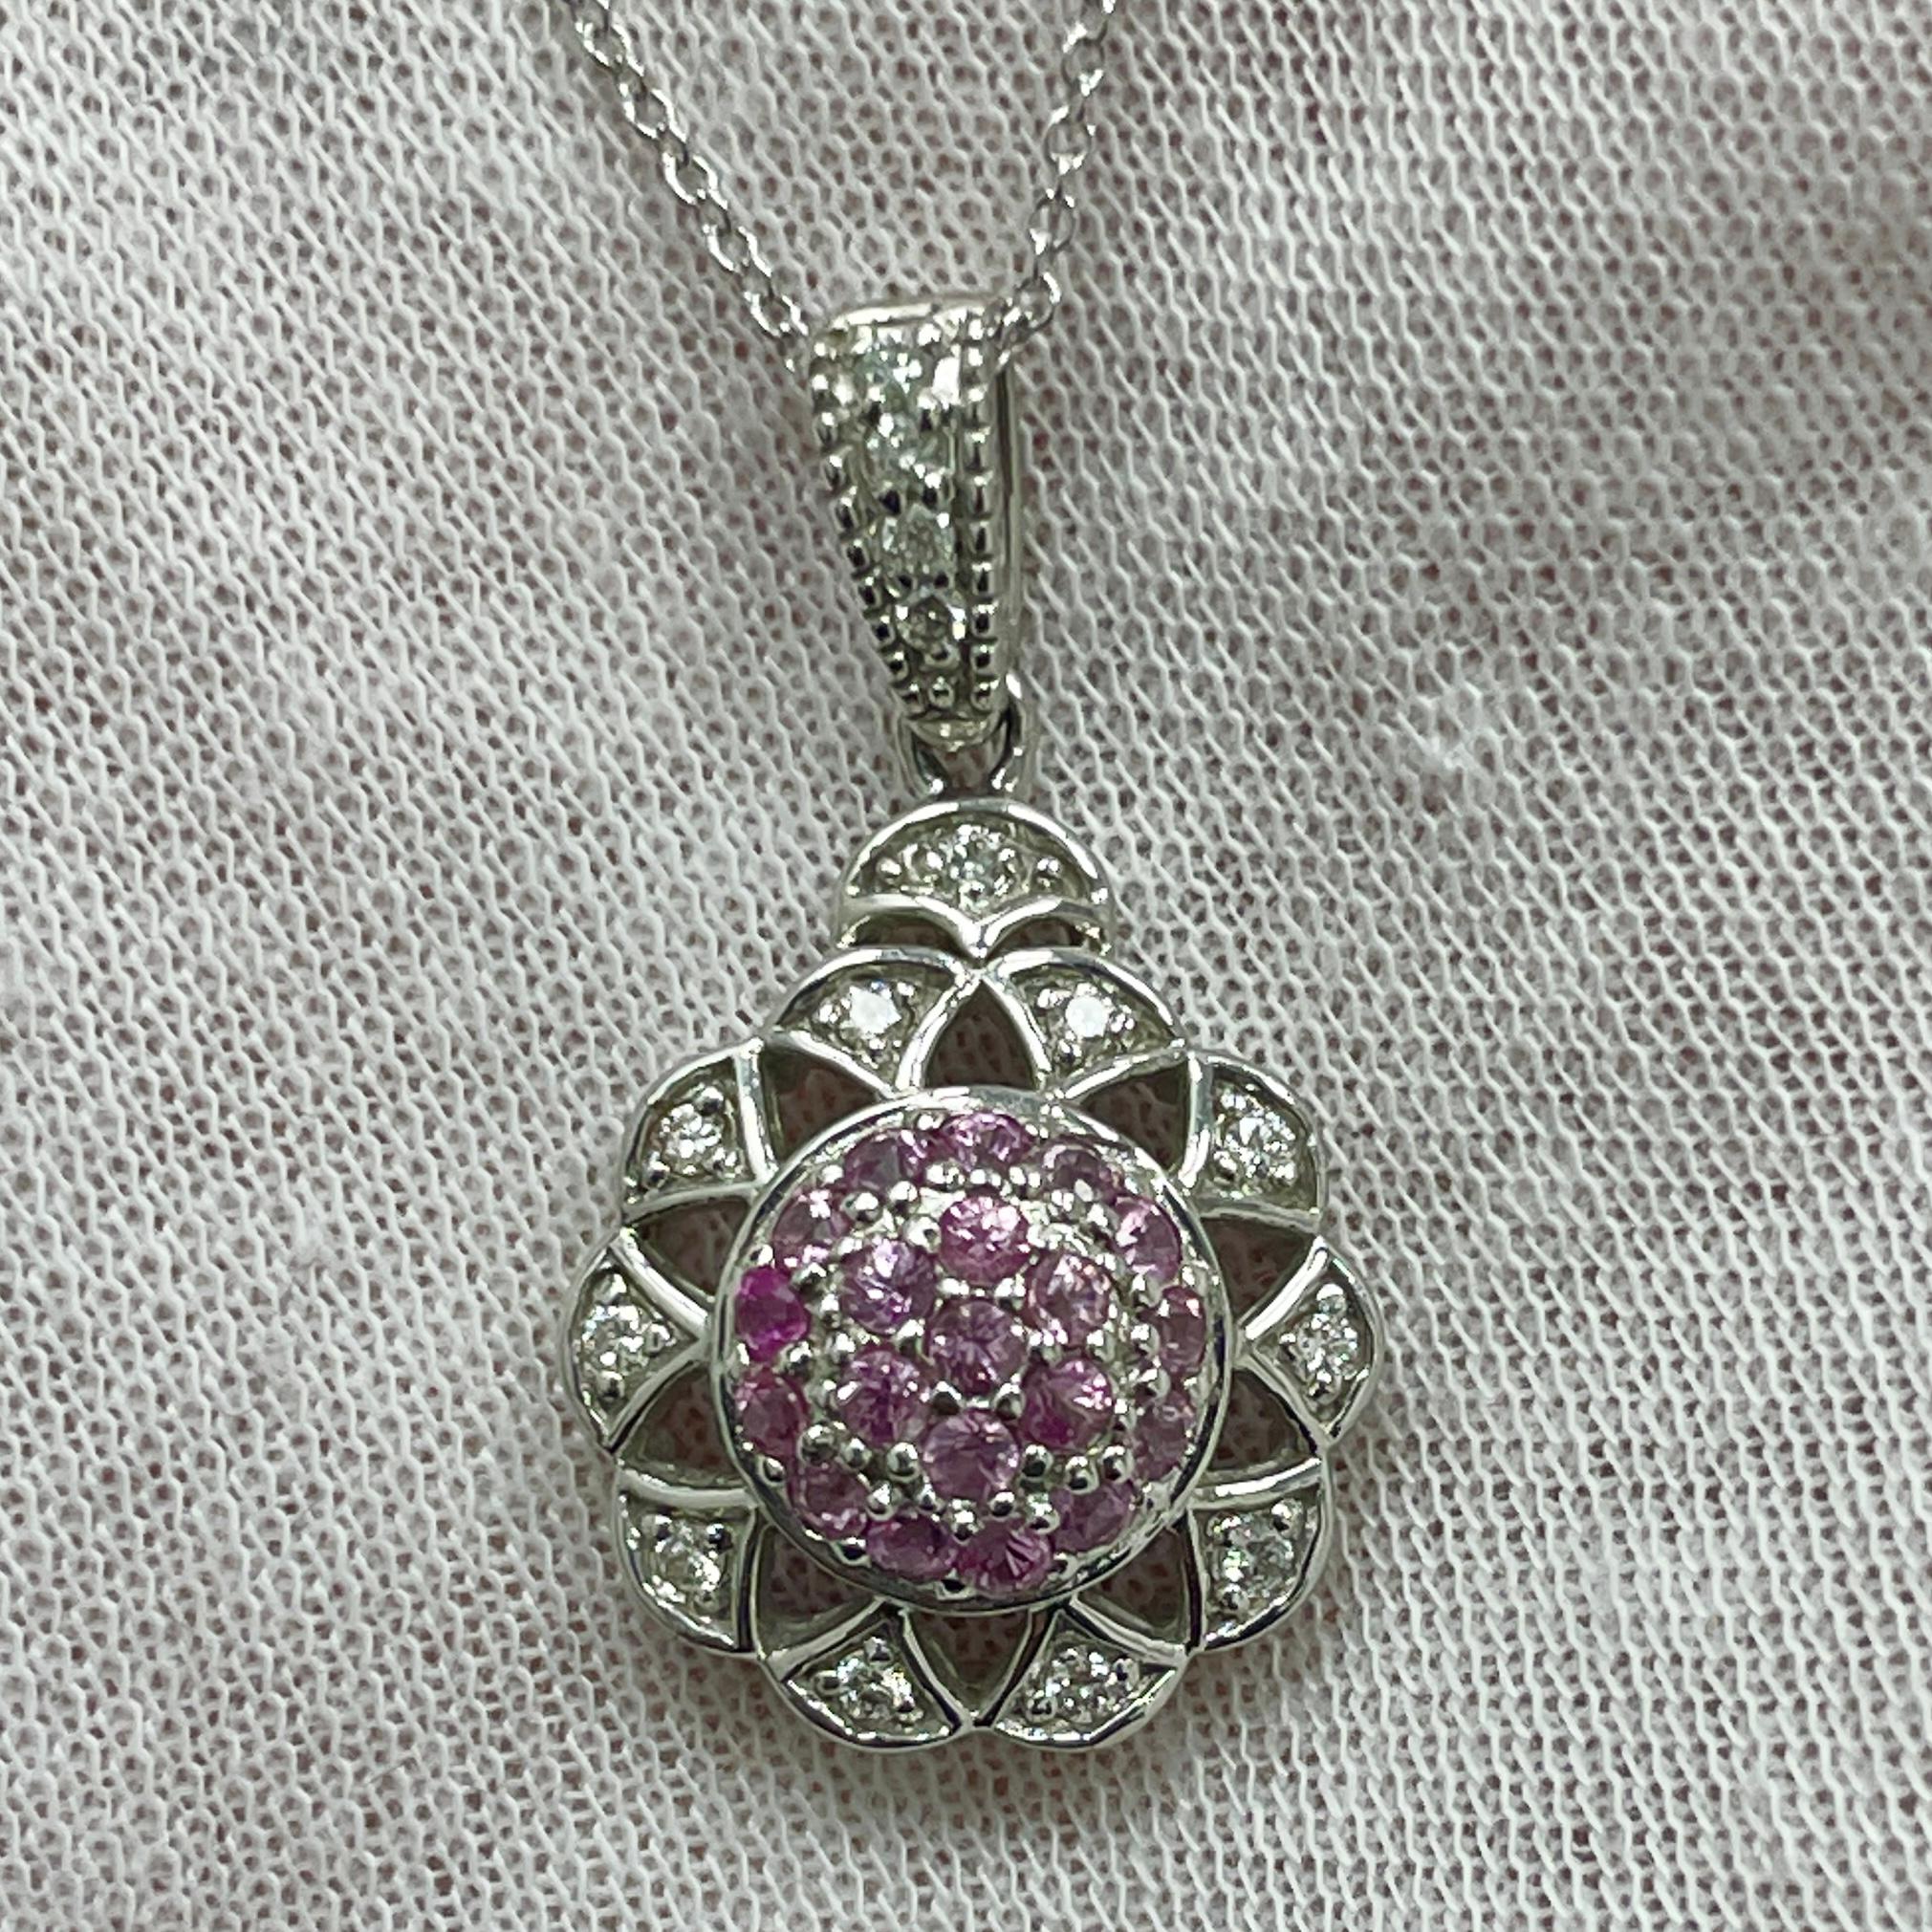 .70Ct round pink sapphires in a diamond (.17Ct) 14K white gold pendant